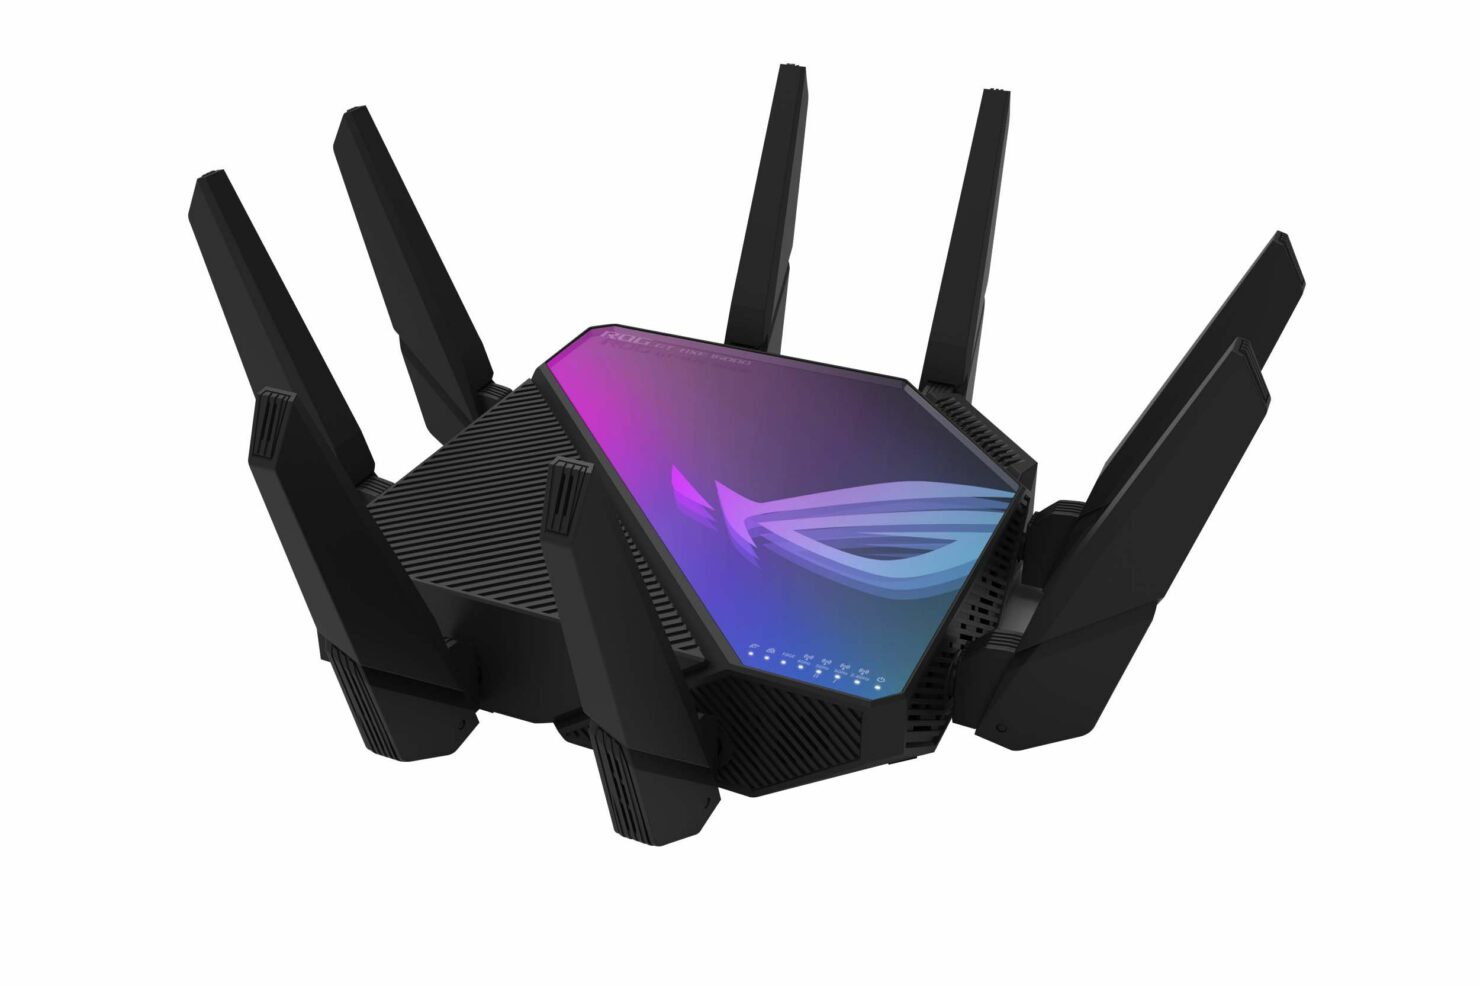 ASUS-Announces-Worlds-First-Quad-Band-Wi-Fi-6E-Gaming-Router-1480x986.jpg